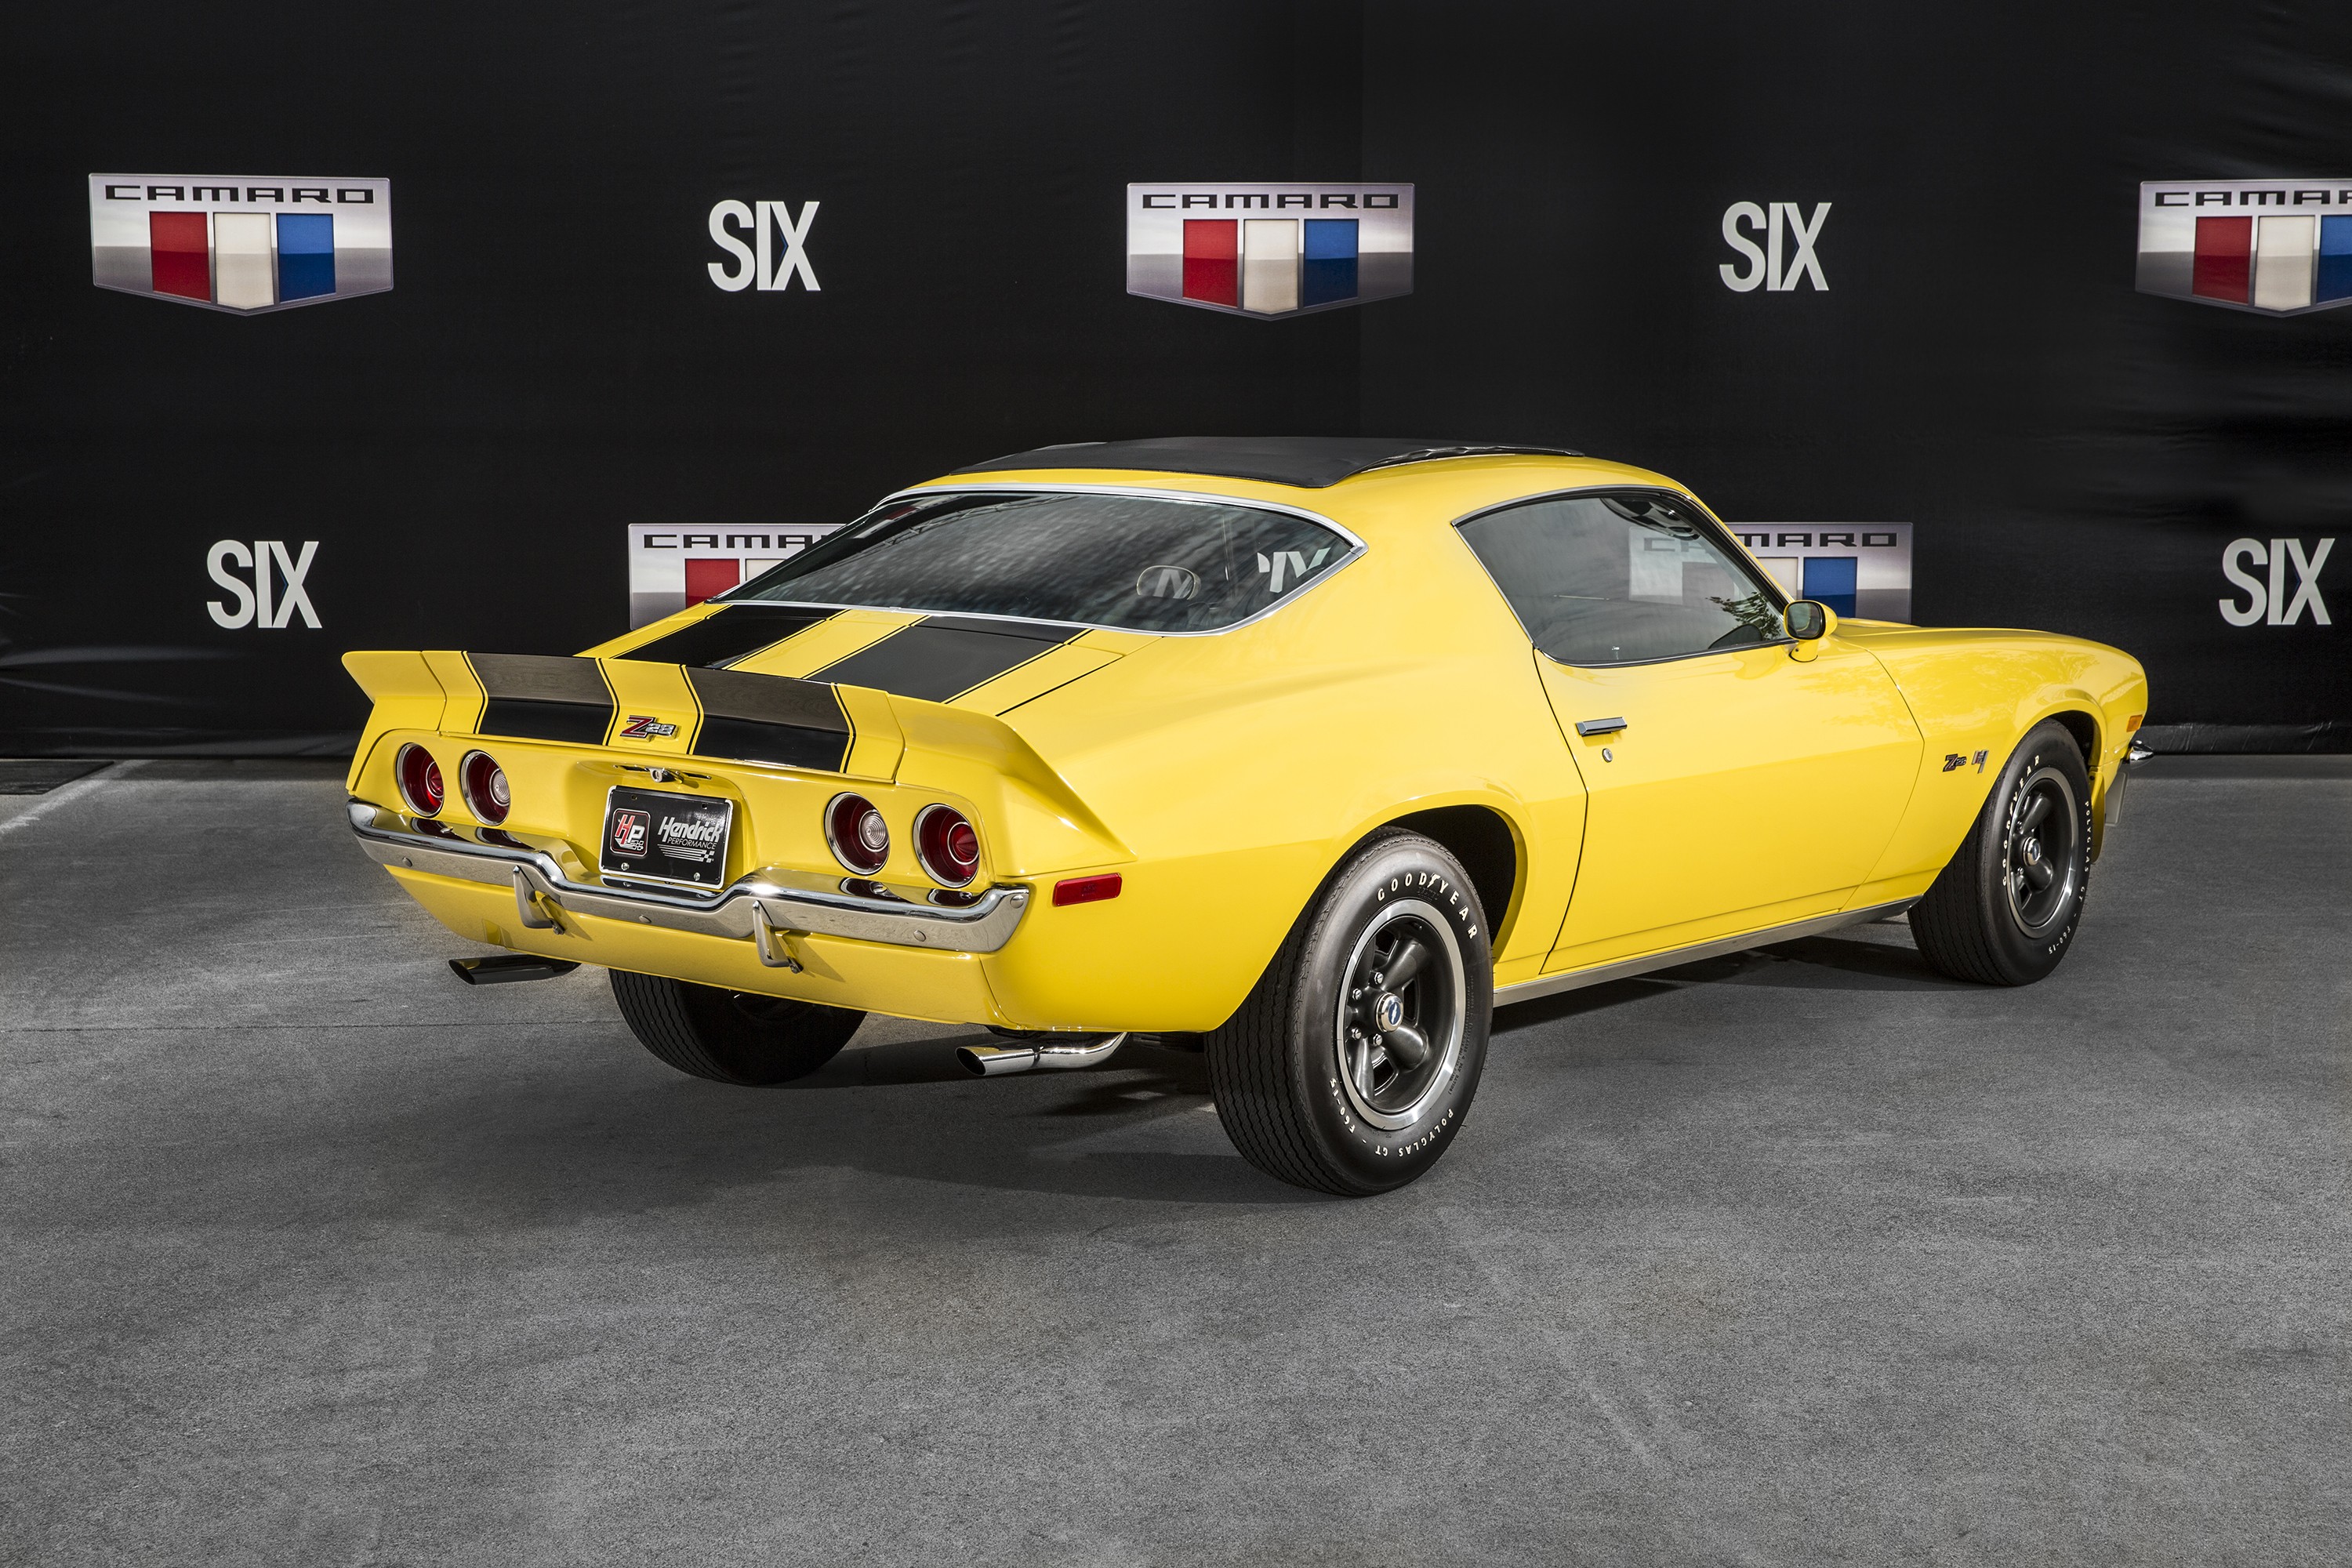 Here’s How the Chevrolet Camaro Changed From 1966 to the